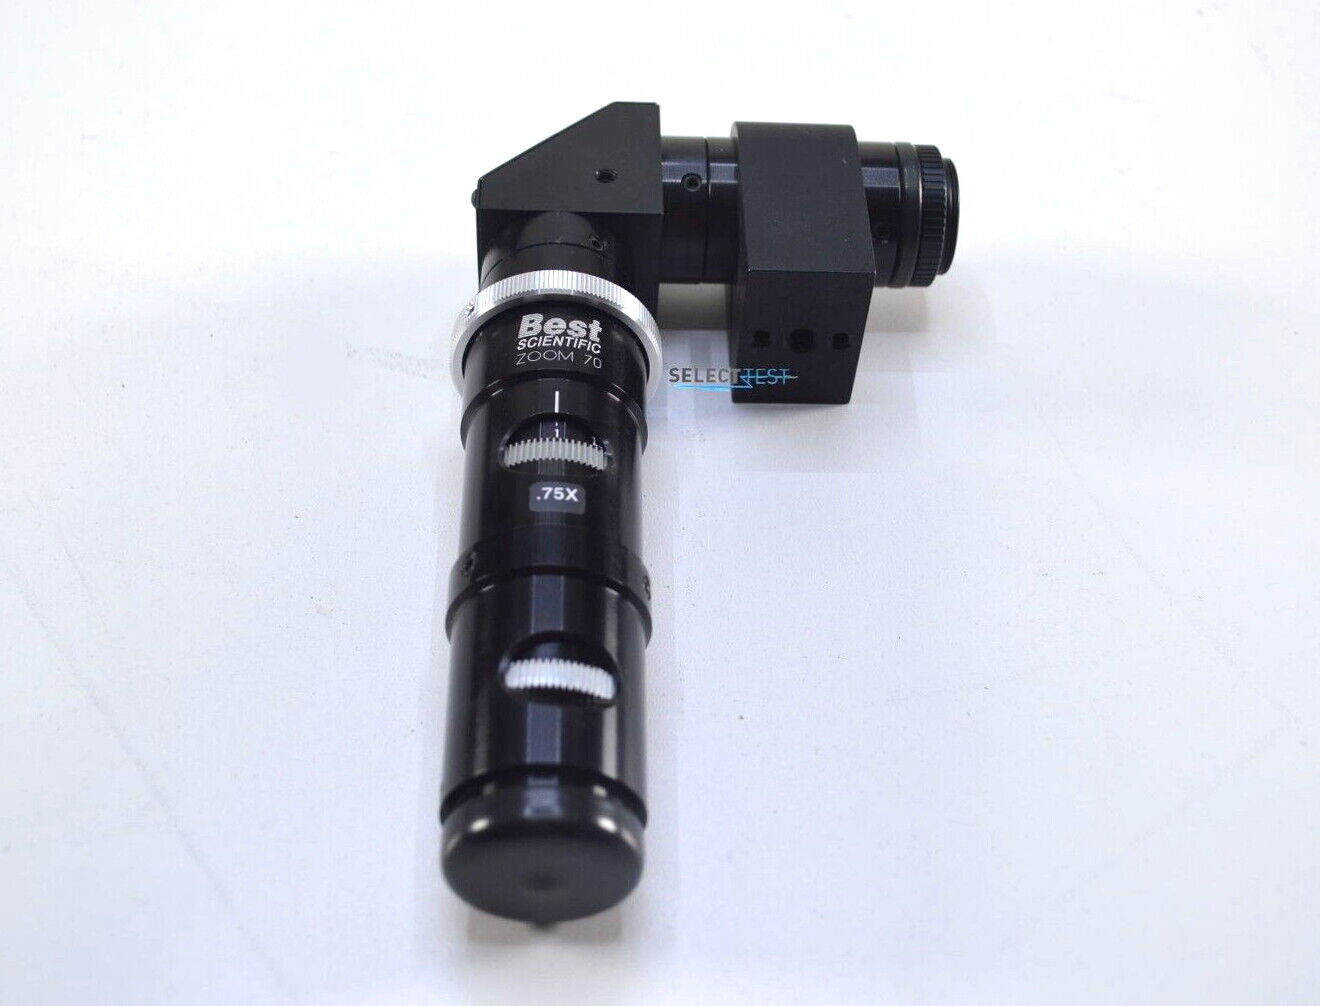 OPTEM ZOOM 70 OPTICAL ZOOM LENS WITH 90 DEGREES OPTICAL ANGLE **LOOK** (REF.: G)